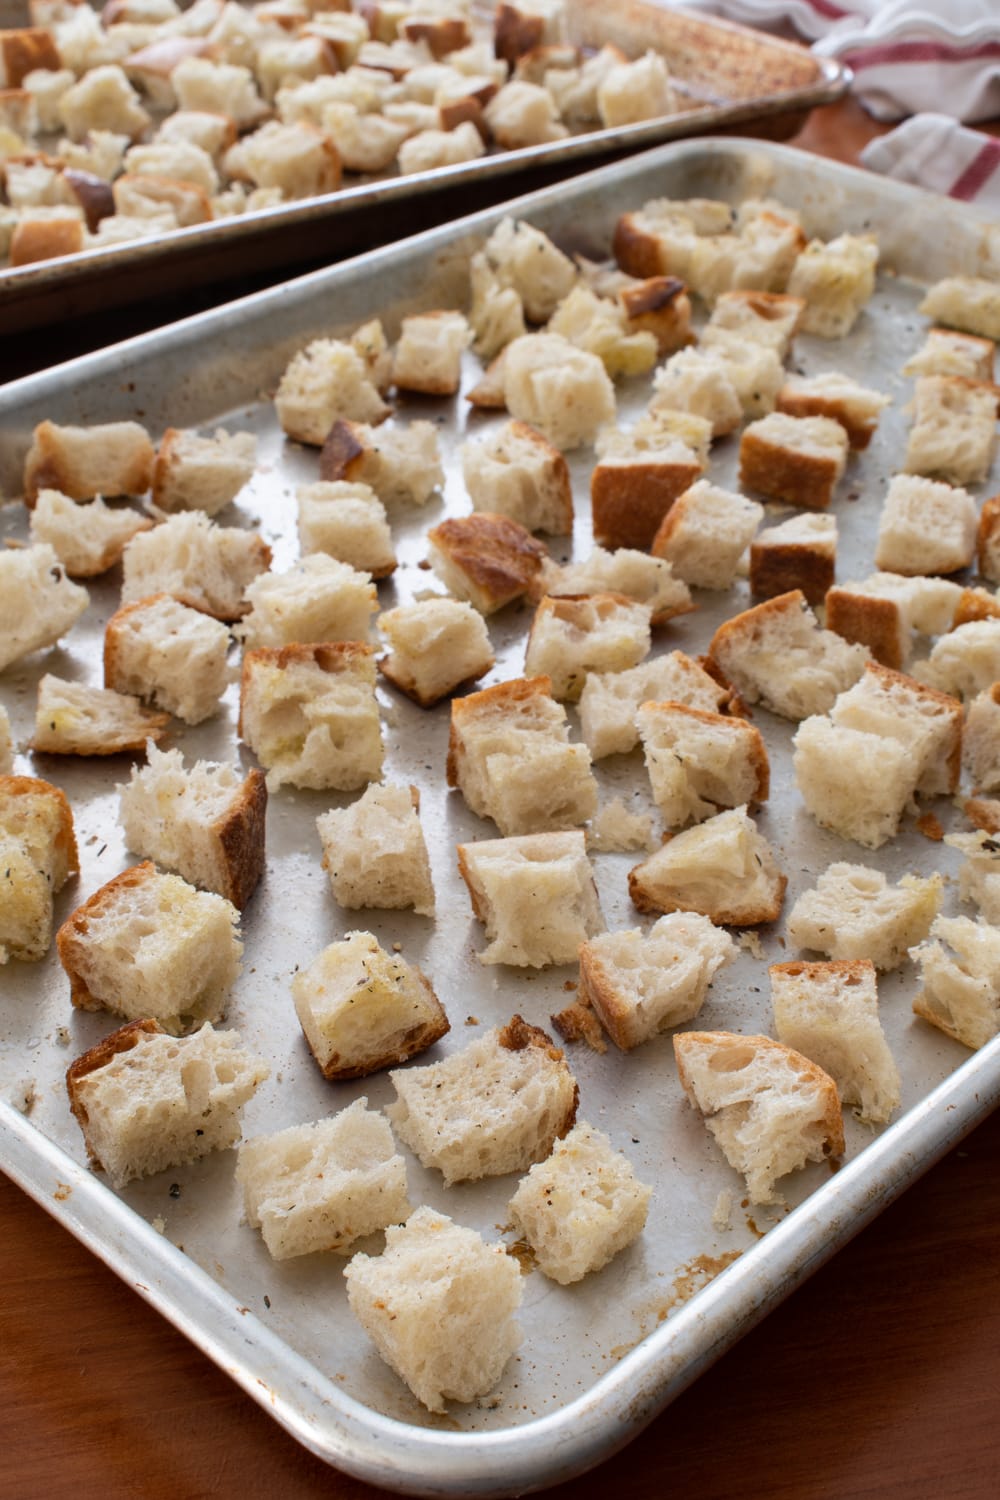 https://fortheloveofcooking-net.exactdn.com/wp-content/uploads/2021/11/Homemade-Bread-Cubes-for-Stuffing-7498-2.jpg?strip=all&lossy=1&quality=90&resize=1000%2C1500&ssl=1